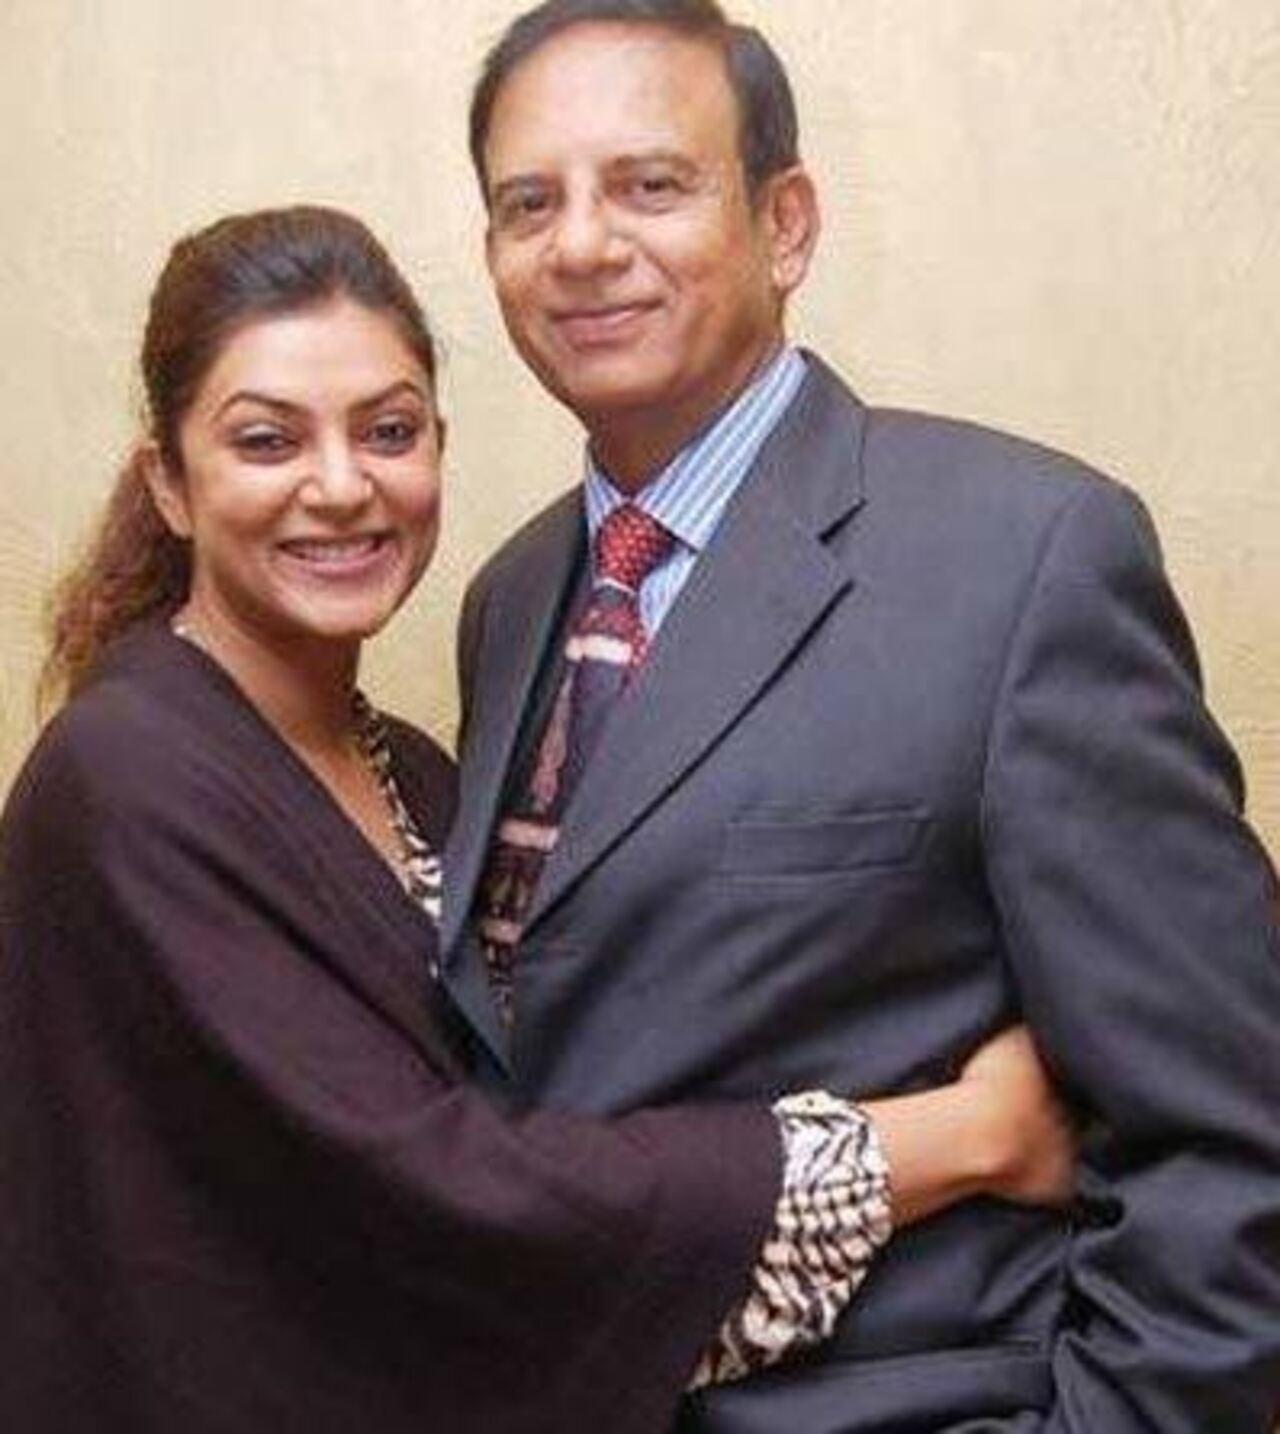 Former Miss Universe Sushmita Sen's father Shubeer Sen was an Indian Airforce Wing Commander. Sen attended Air Force Golden Jubilee Institute in New Delhi